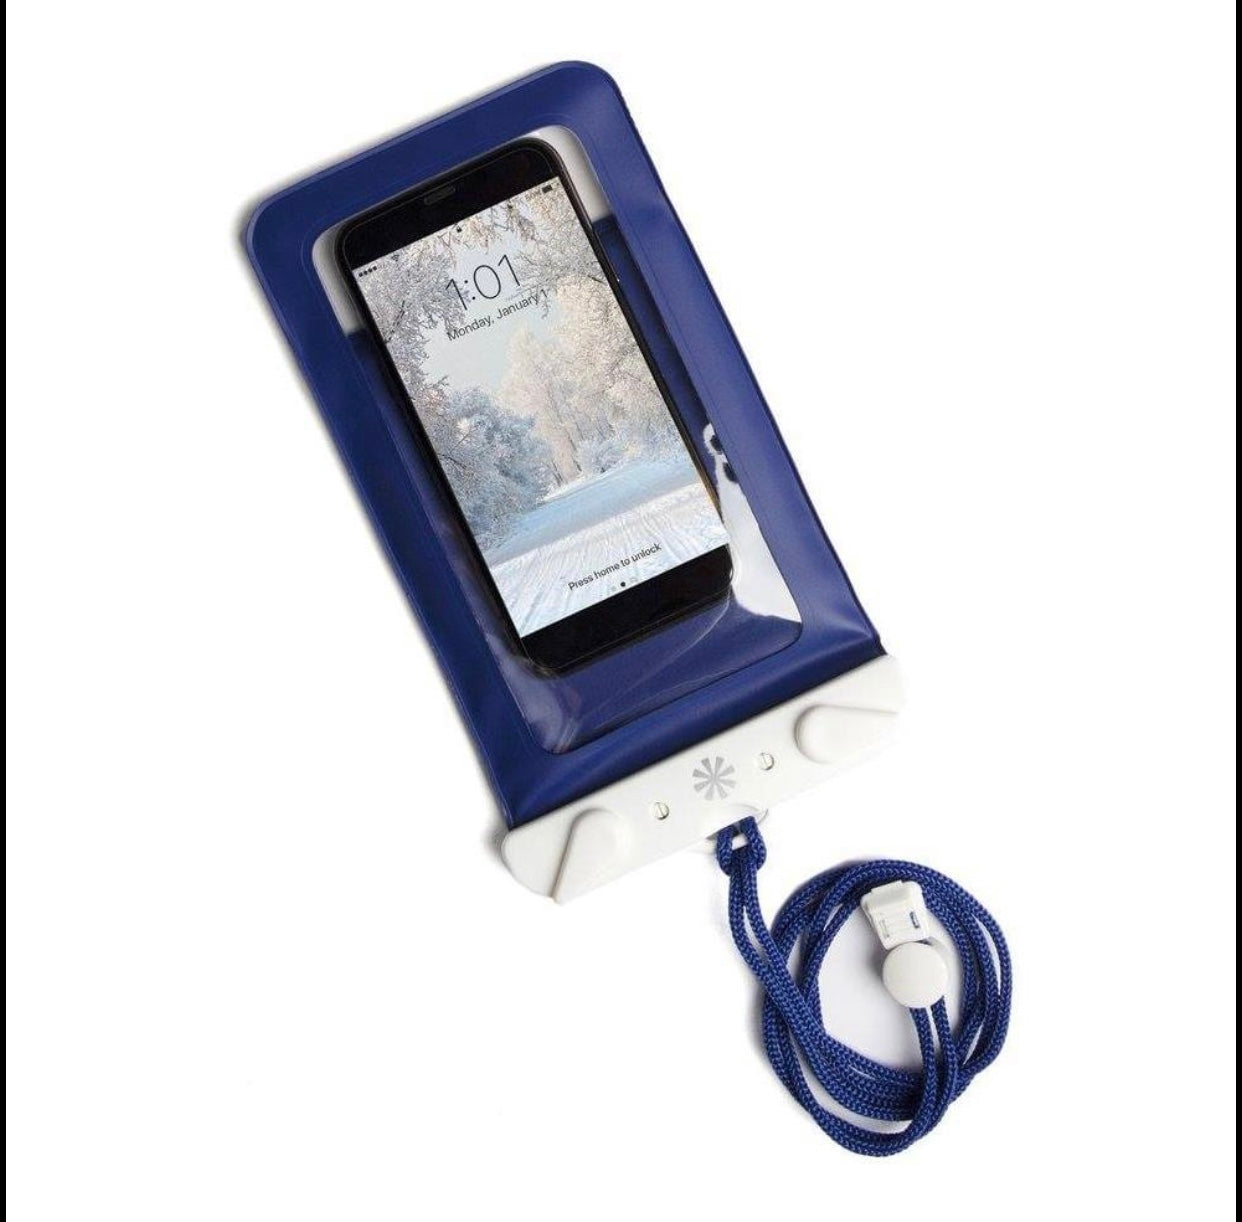 Tech Candy Dry Spell Water Defender Bag at ooh la la! in Grapevine TX 76051 (Phone): Navy